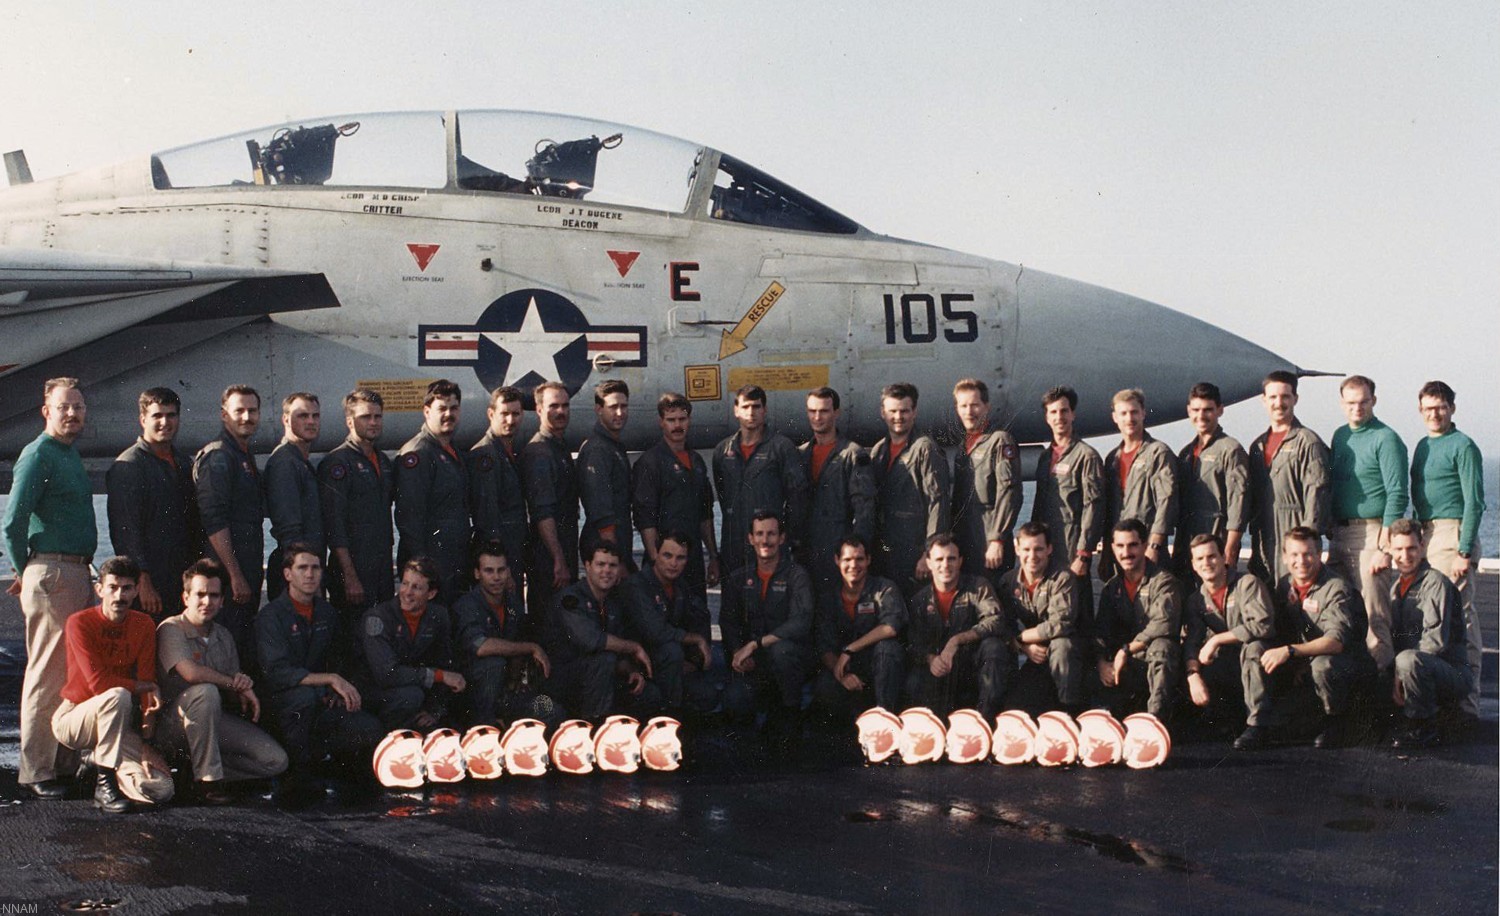 vf-1 wolfpack fighter squadron f-14a tomcat carrier air wing cvw-2 uss ranger cv-61 69